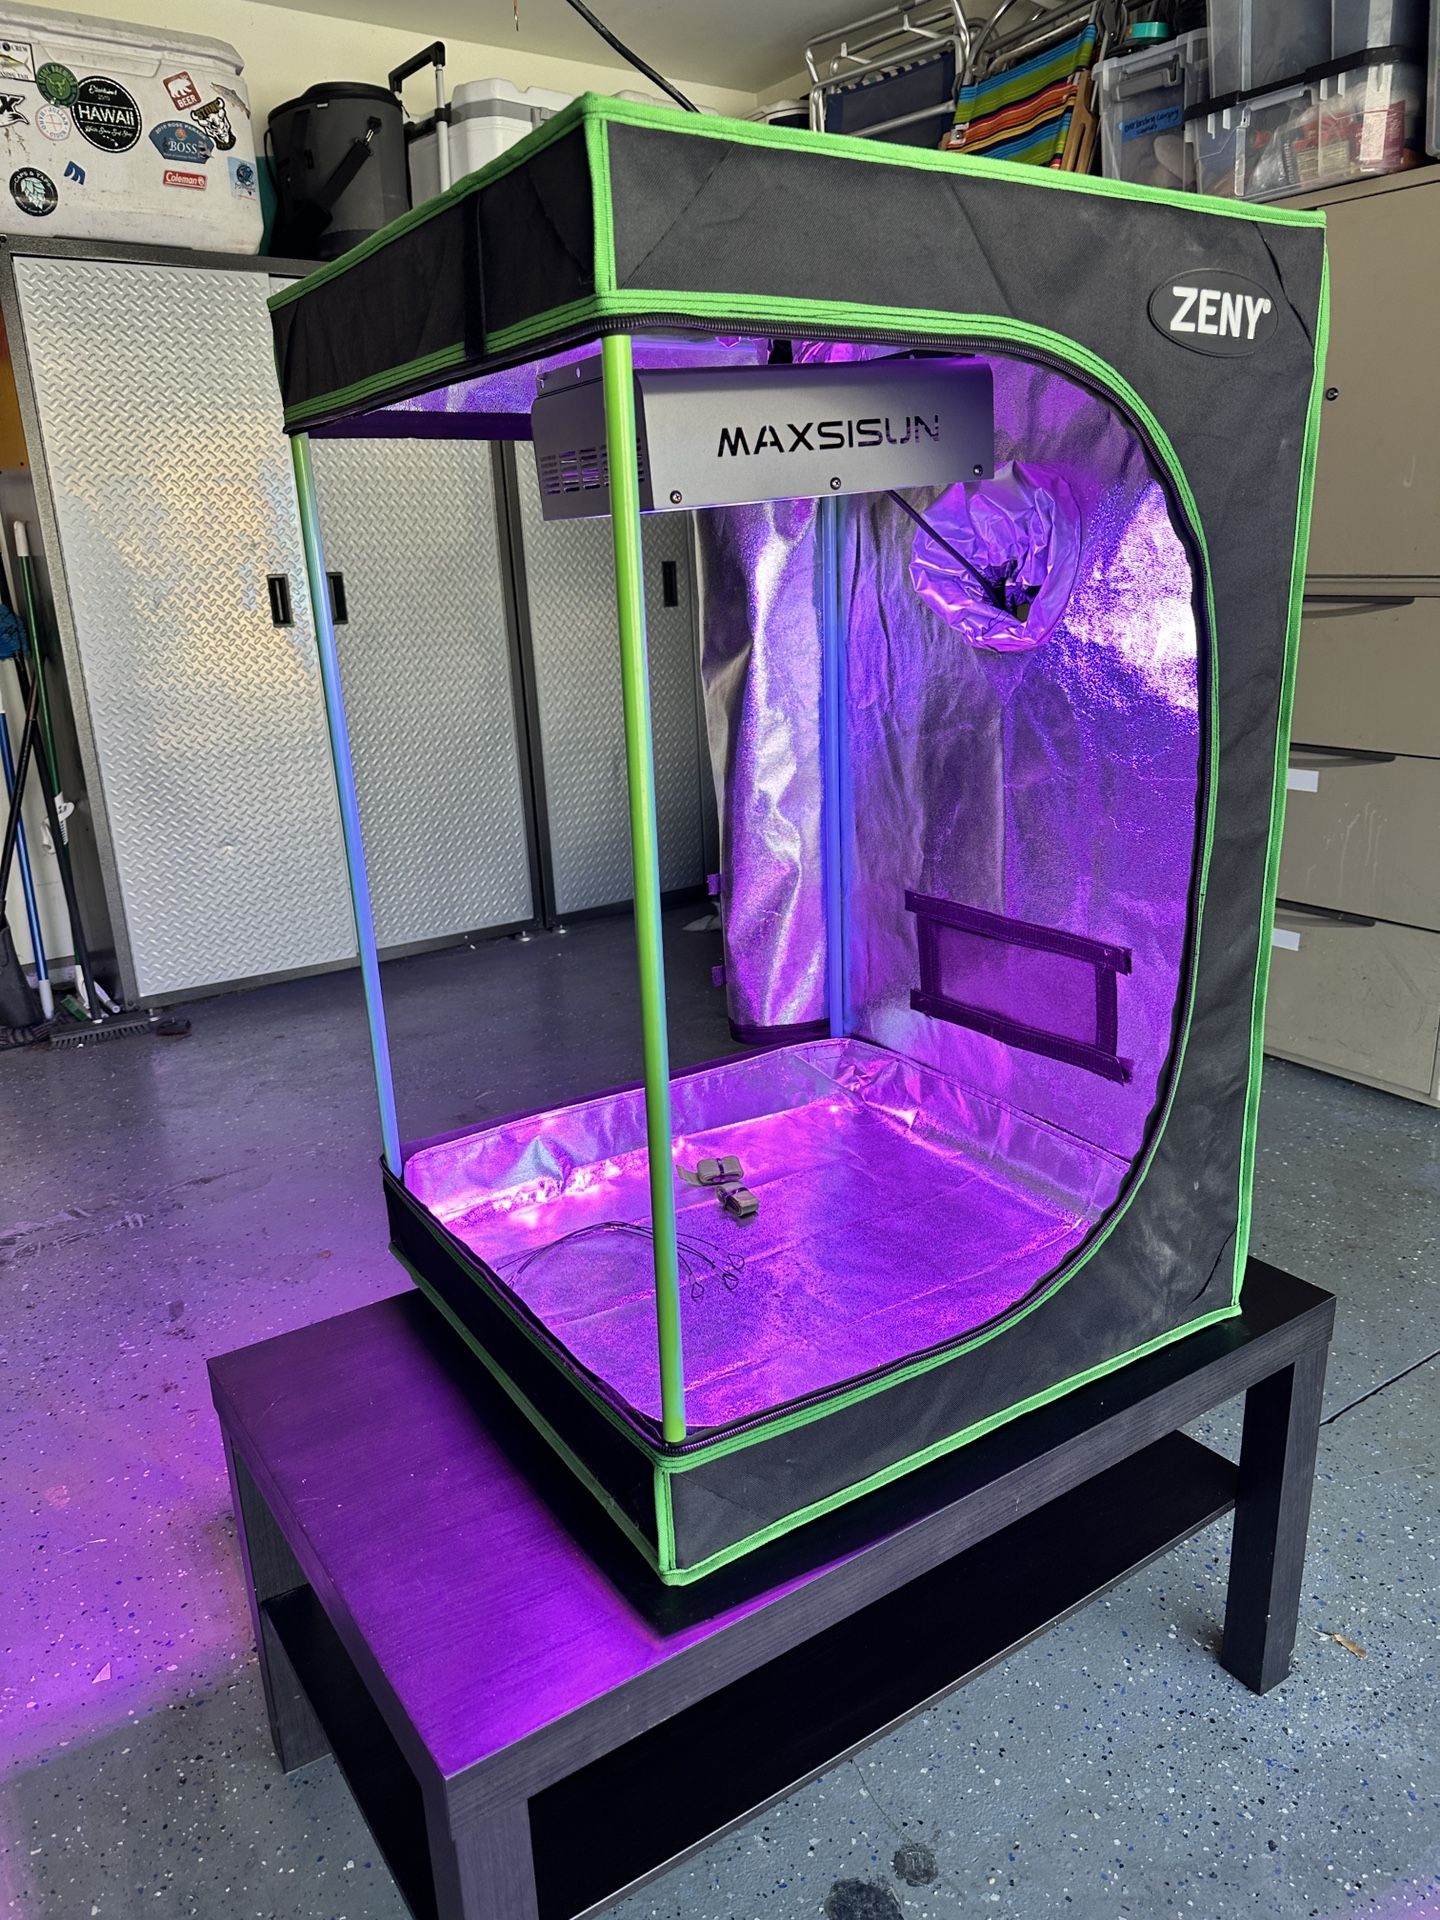 Grow Tent With Light & Fan